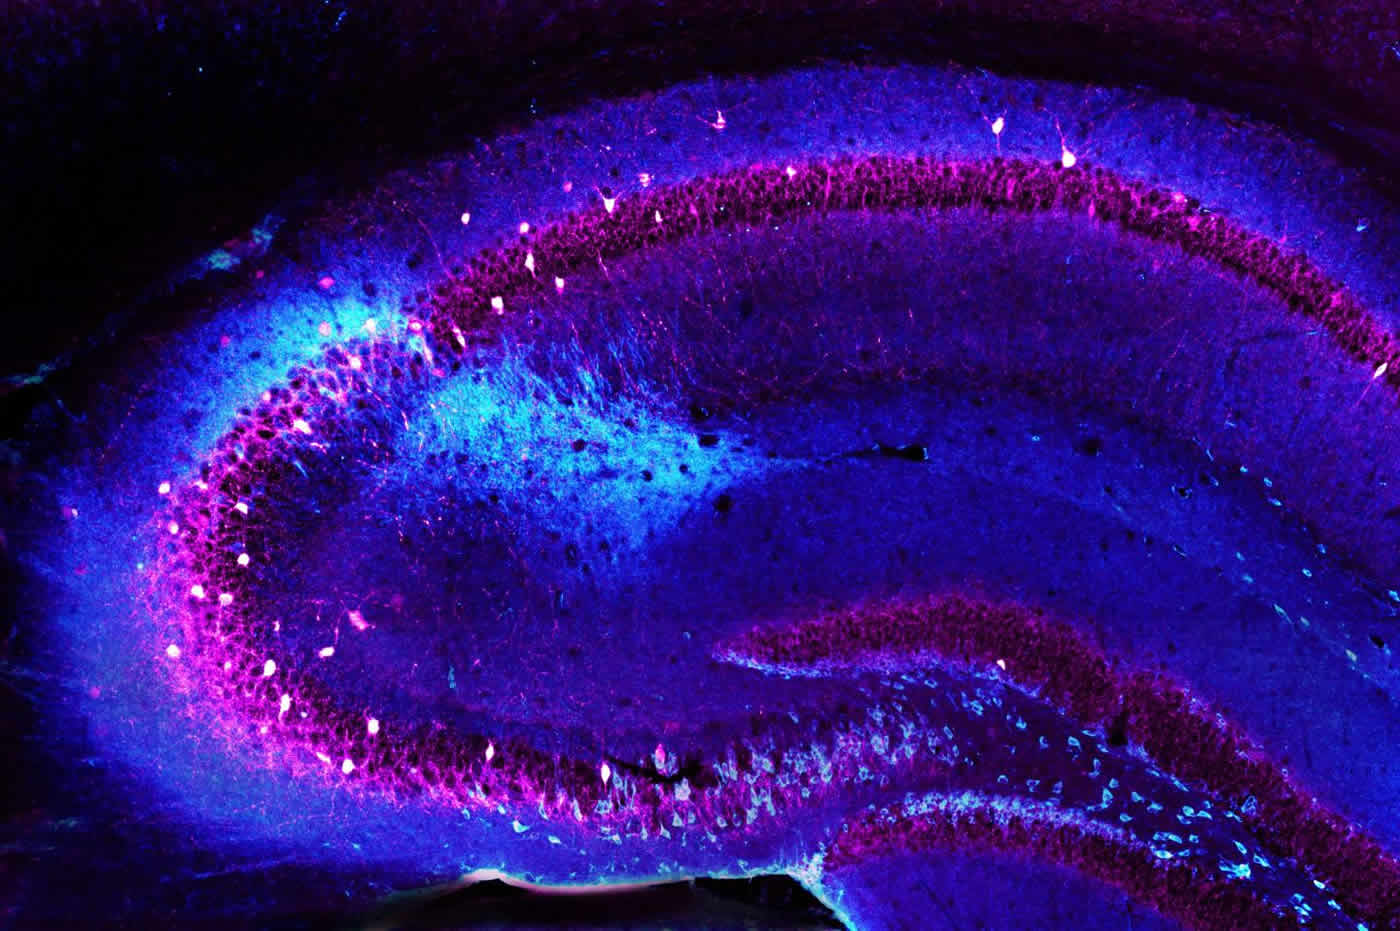 Image shows inhibitory neurons in the CA2 region of the hippocampus.